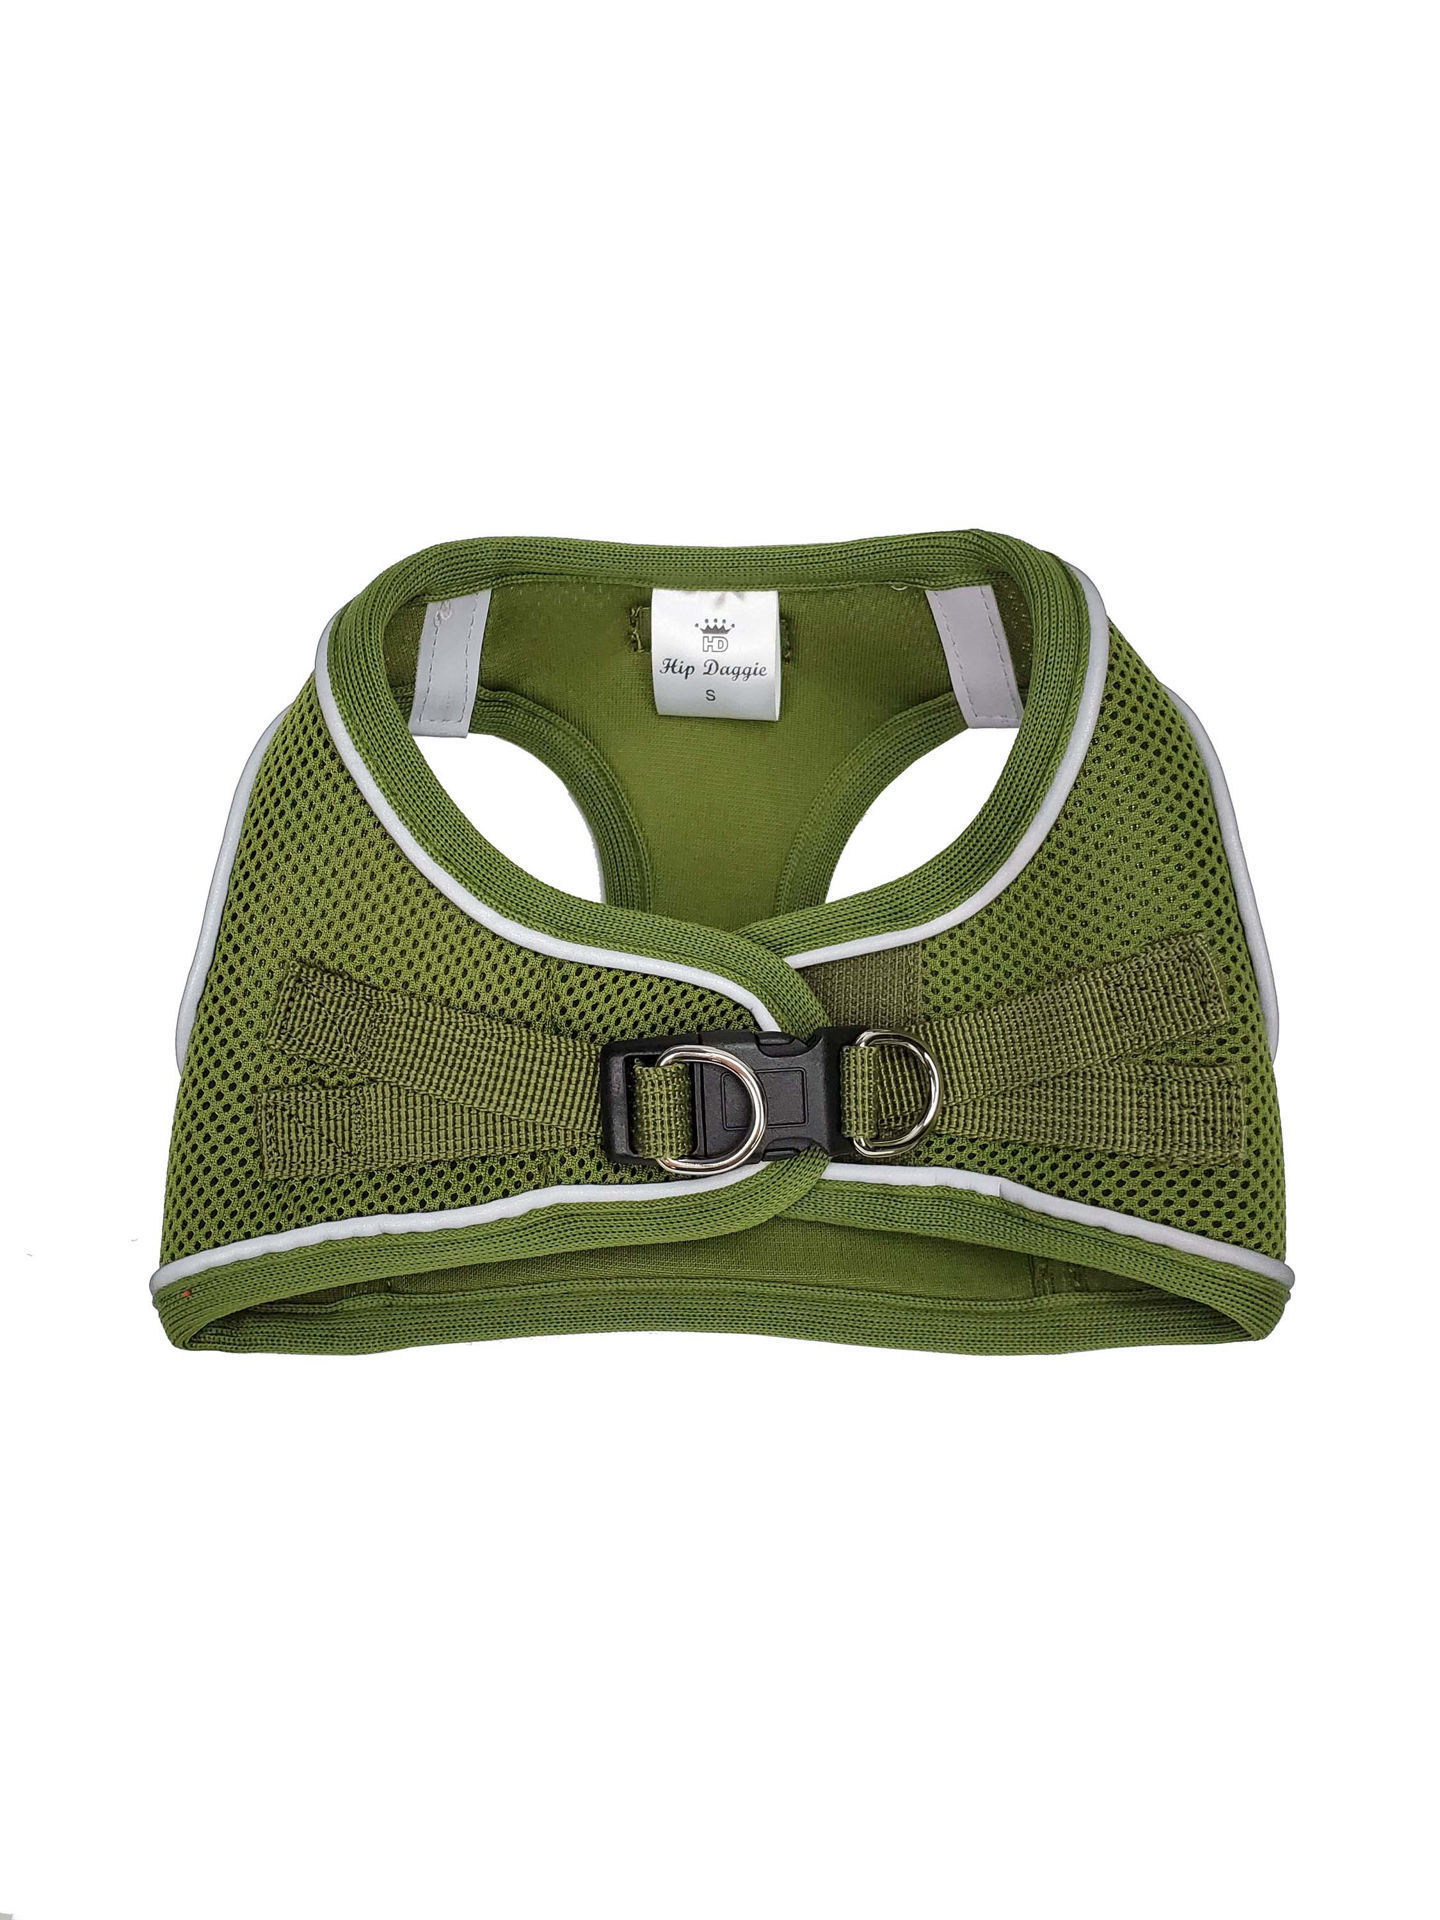 Picture of EZ Step-In Harness Vest - Green/Olive